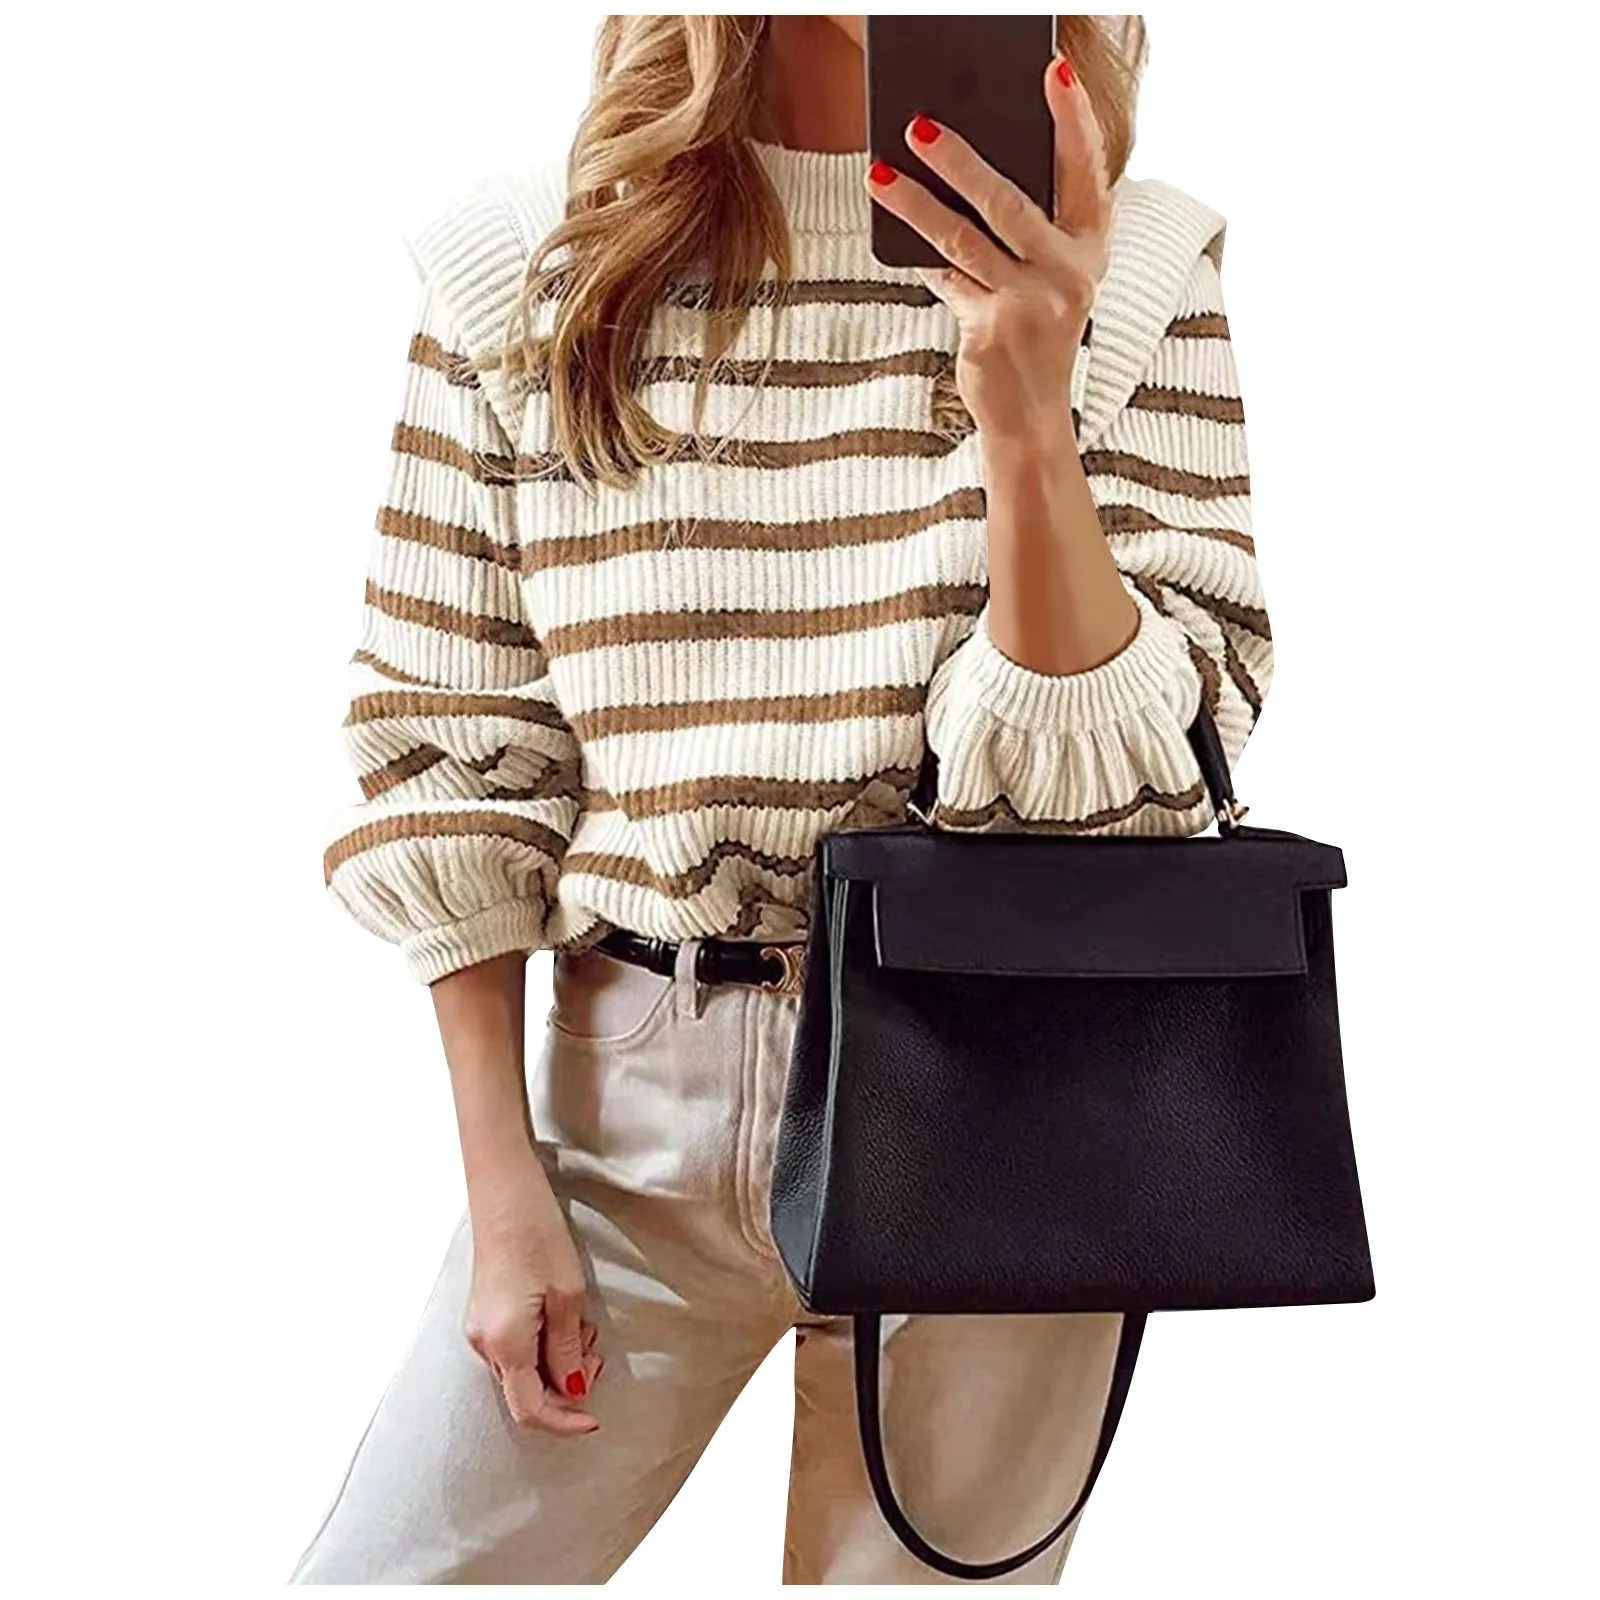 

Fashion Stripes Women Sweaters Crew Neck Long Sleeve Knitted Pullovers Autumn Vintage England Style Baggy Tops Retro Clothing